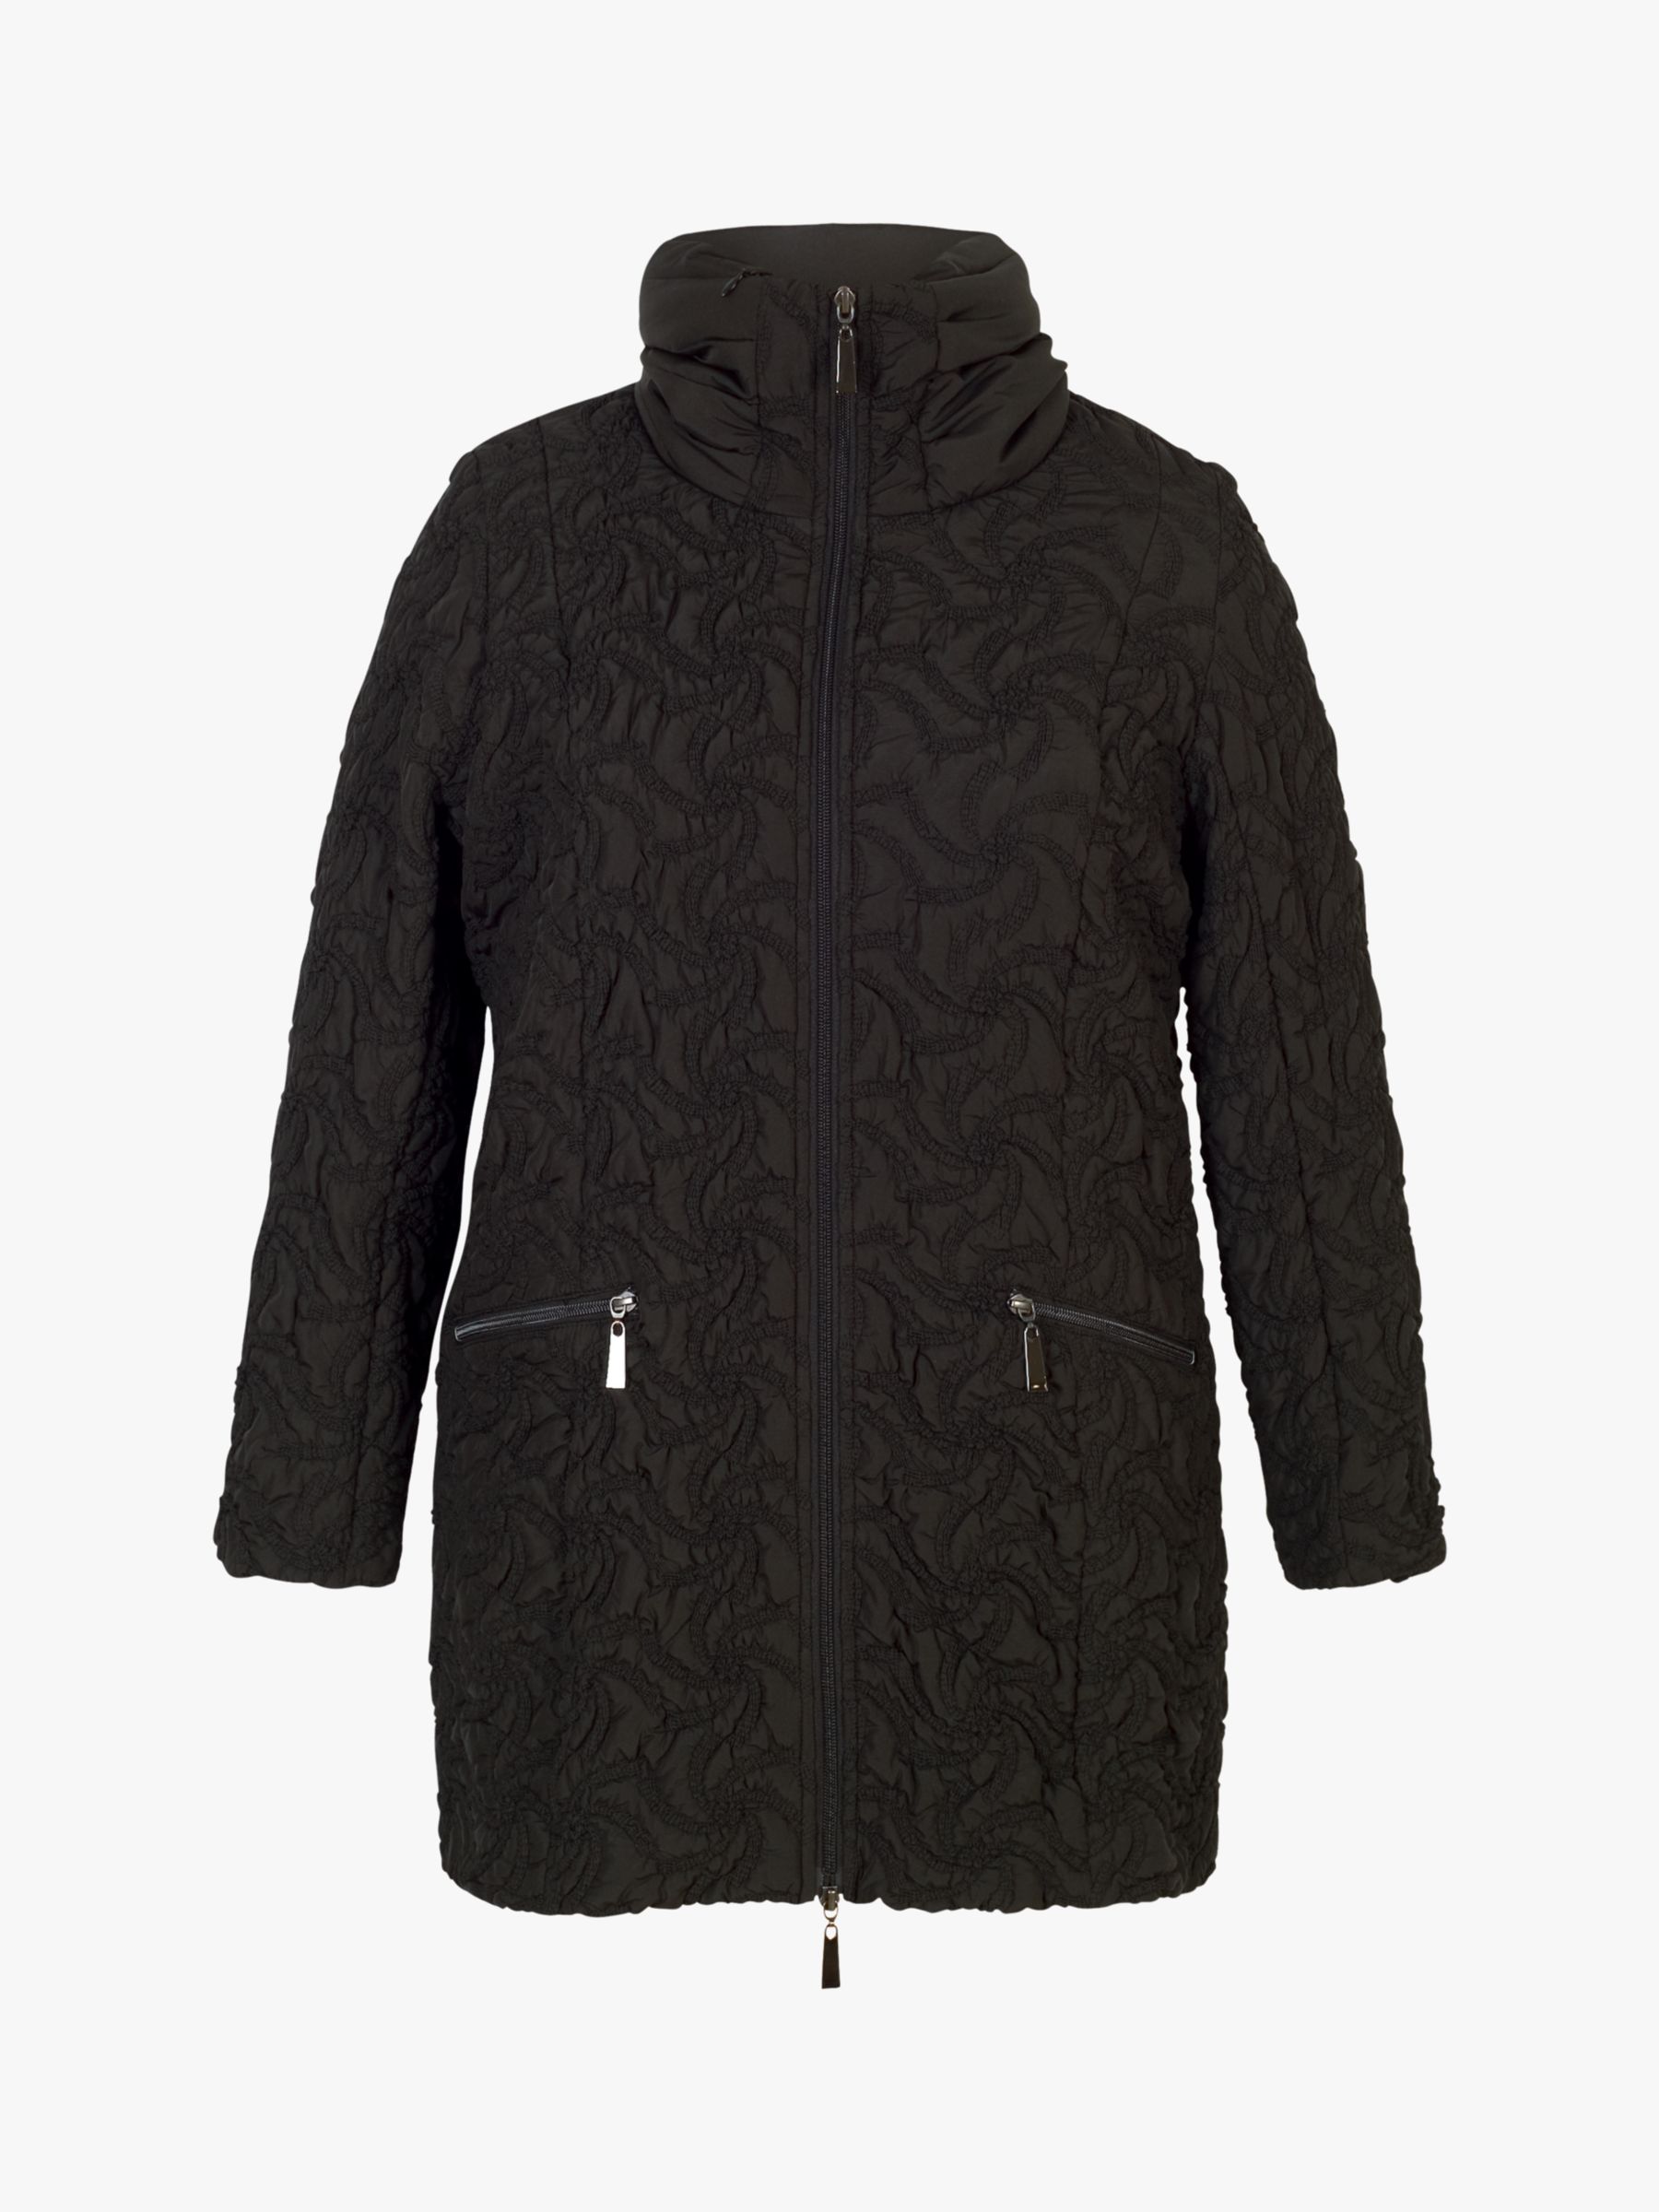 chesca Squiggle Embroidered Quilted Coat, Black at John Lewis & Partners